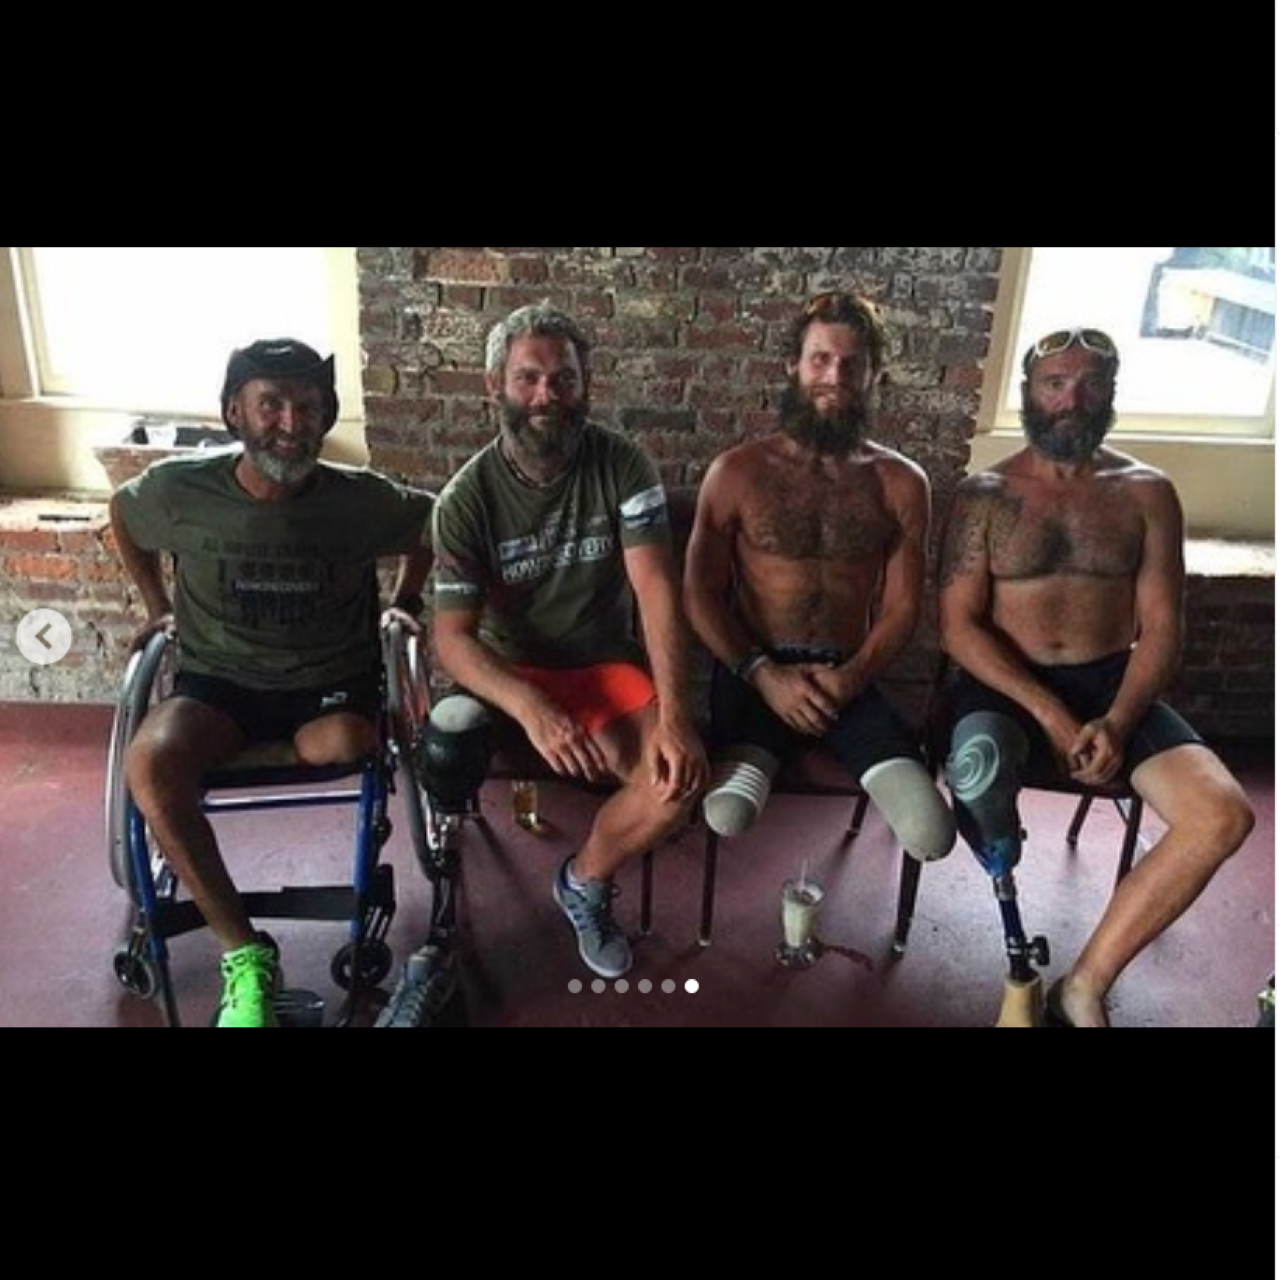 Team Legless: Four soldiers, three legs and a 3,000 mile rowing mission